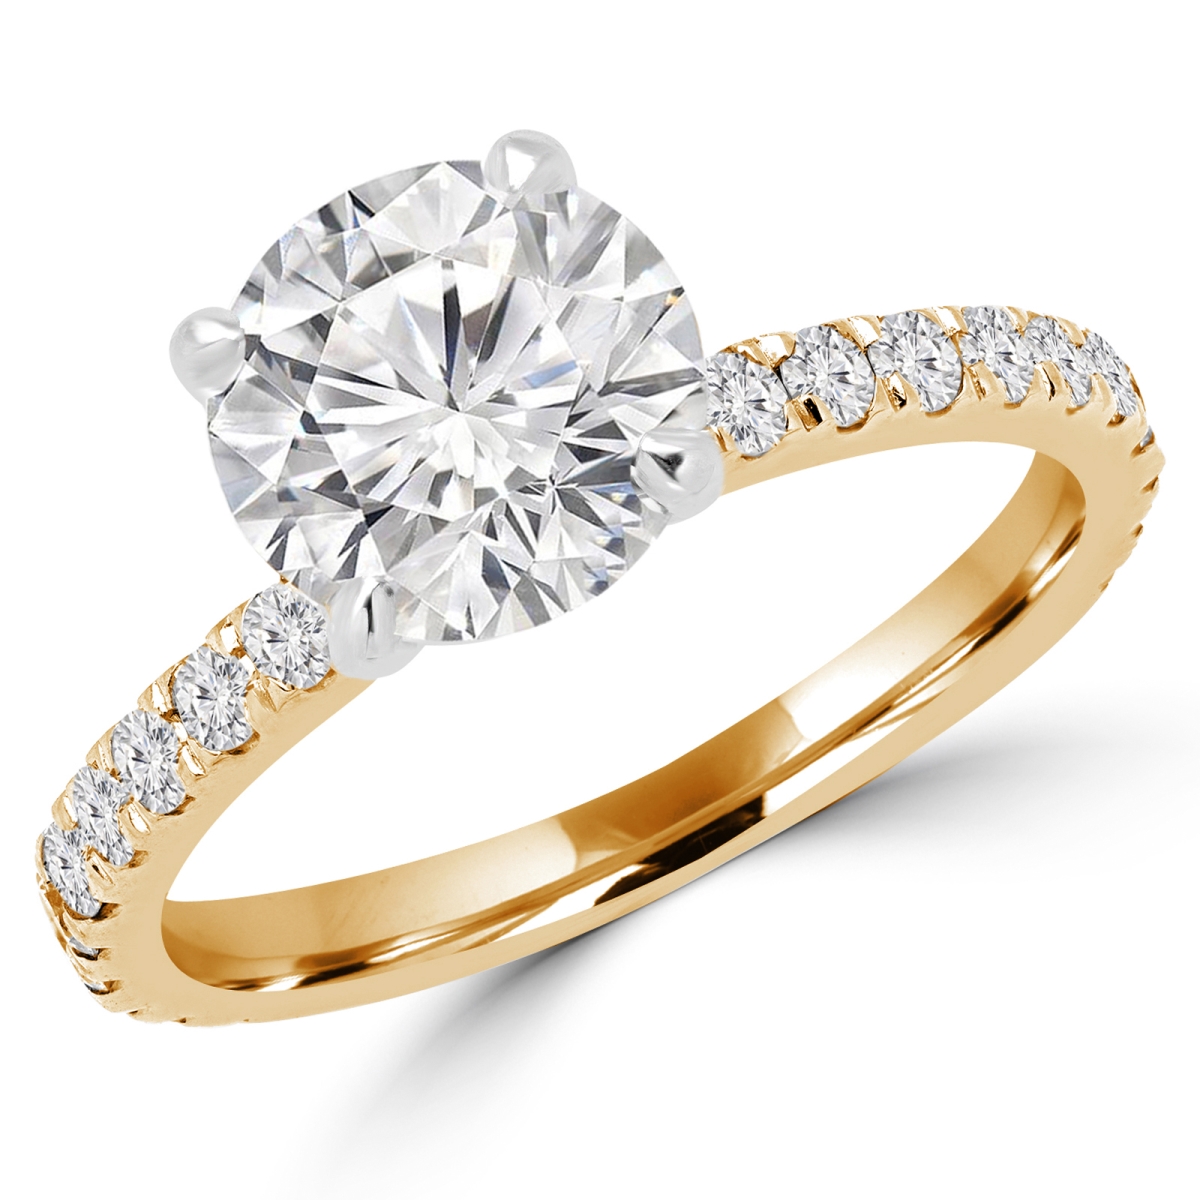 Picture of Majesty Diamonds MD160340-7 1 CTW Round Cut Diamond Multi Stone Engagement Ring in 14K Yellow Gold - Size 7